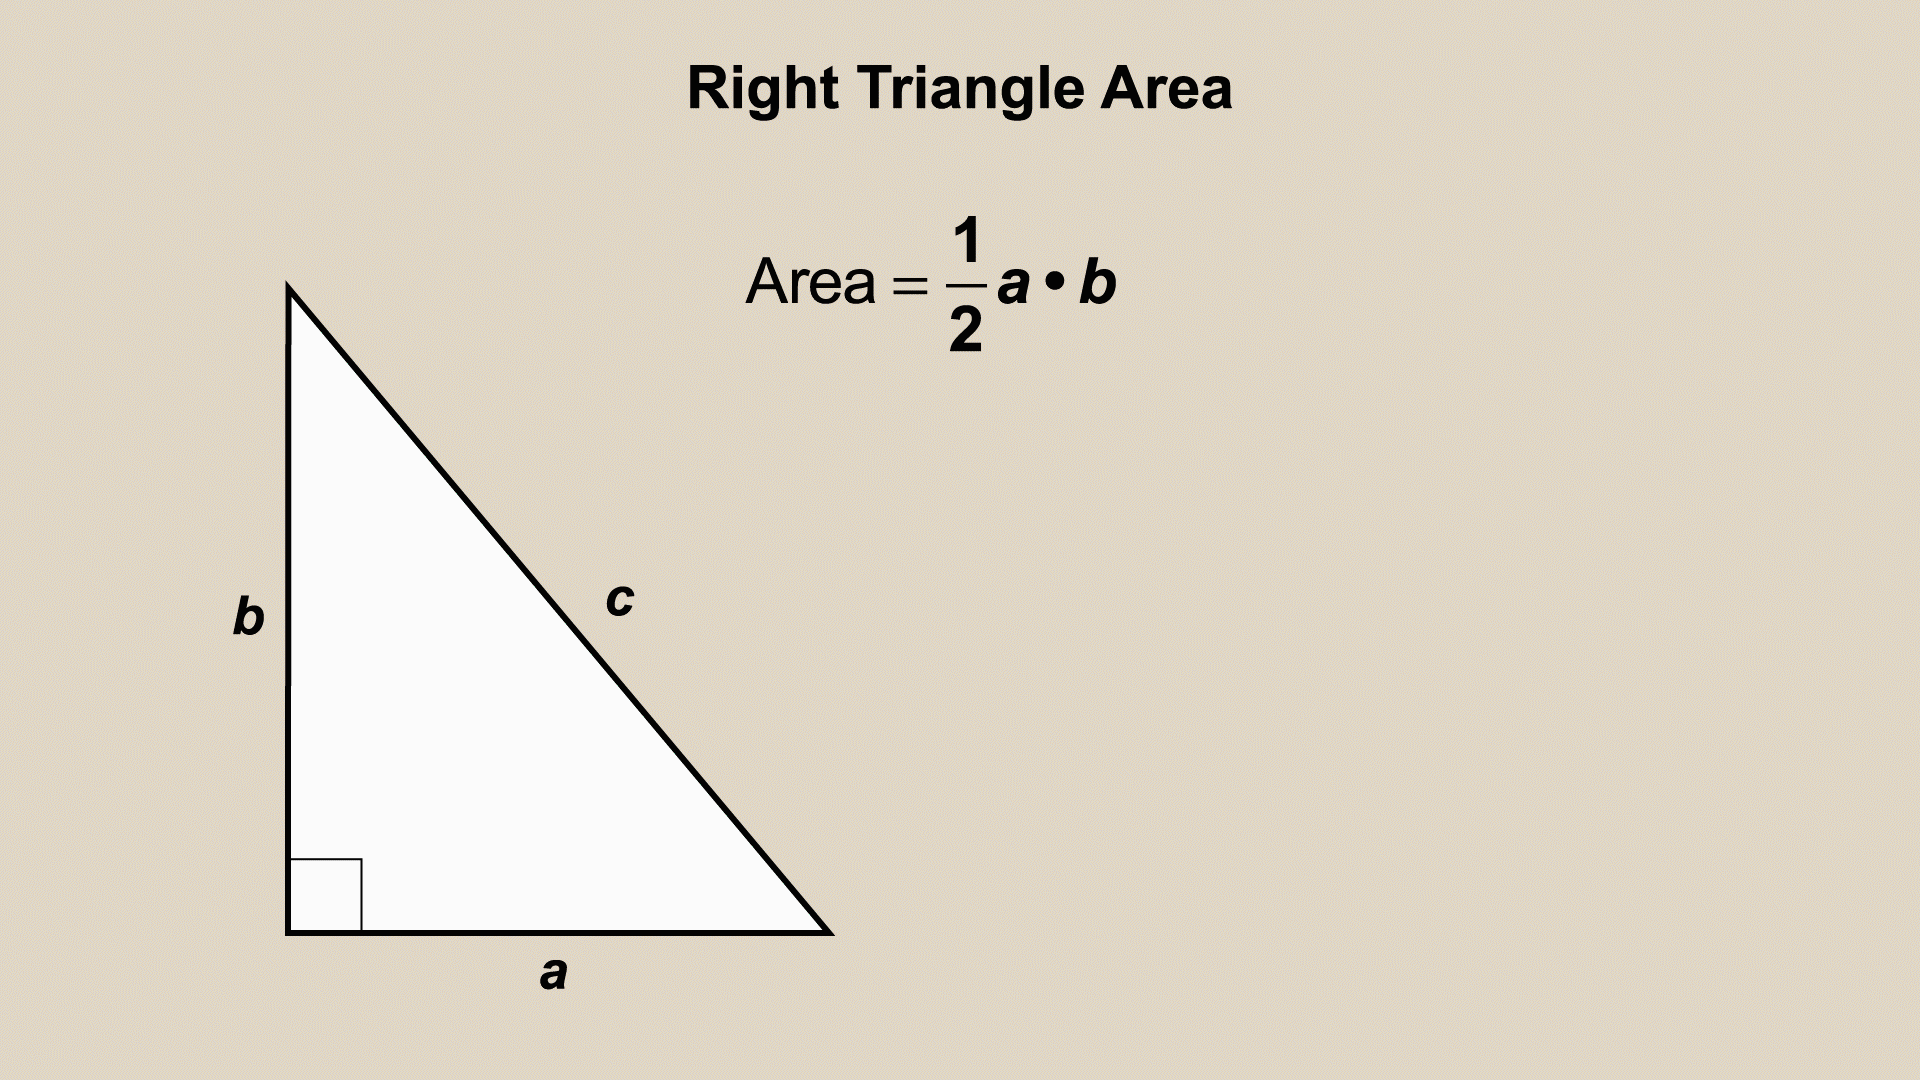 This piece of animated math clip art shows how to find the area of a right triangle.